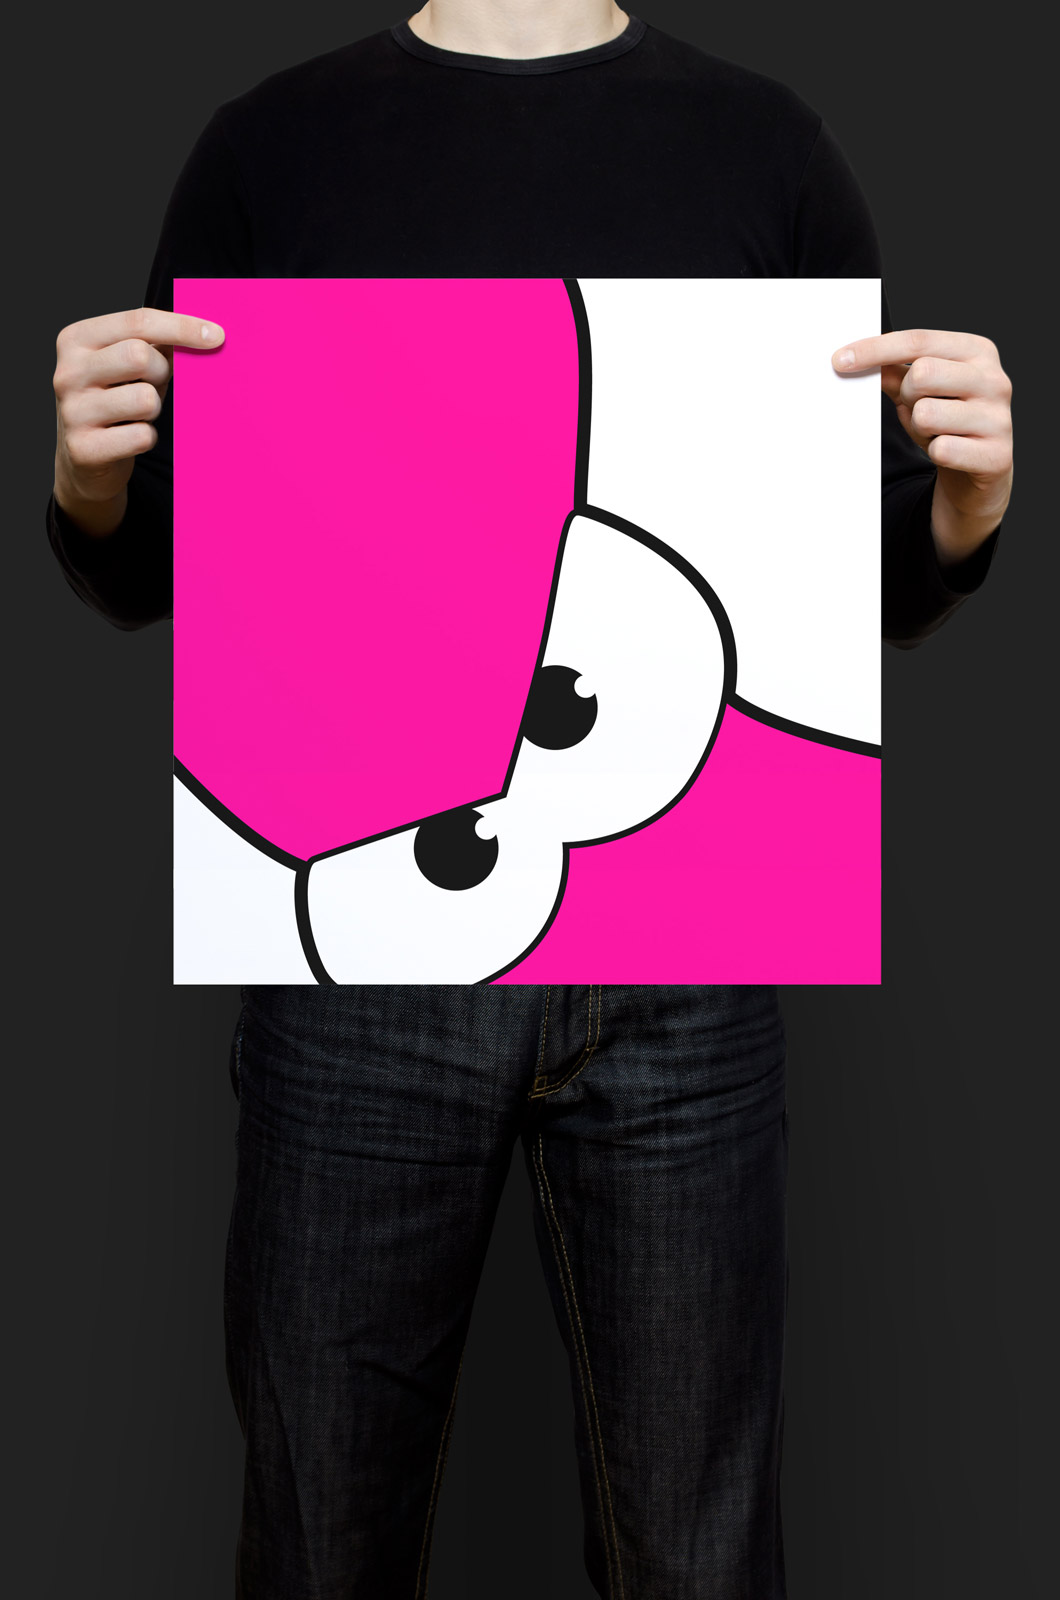 Alexander Glante - Works - The Pink Thing